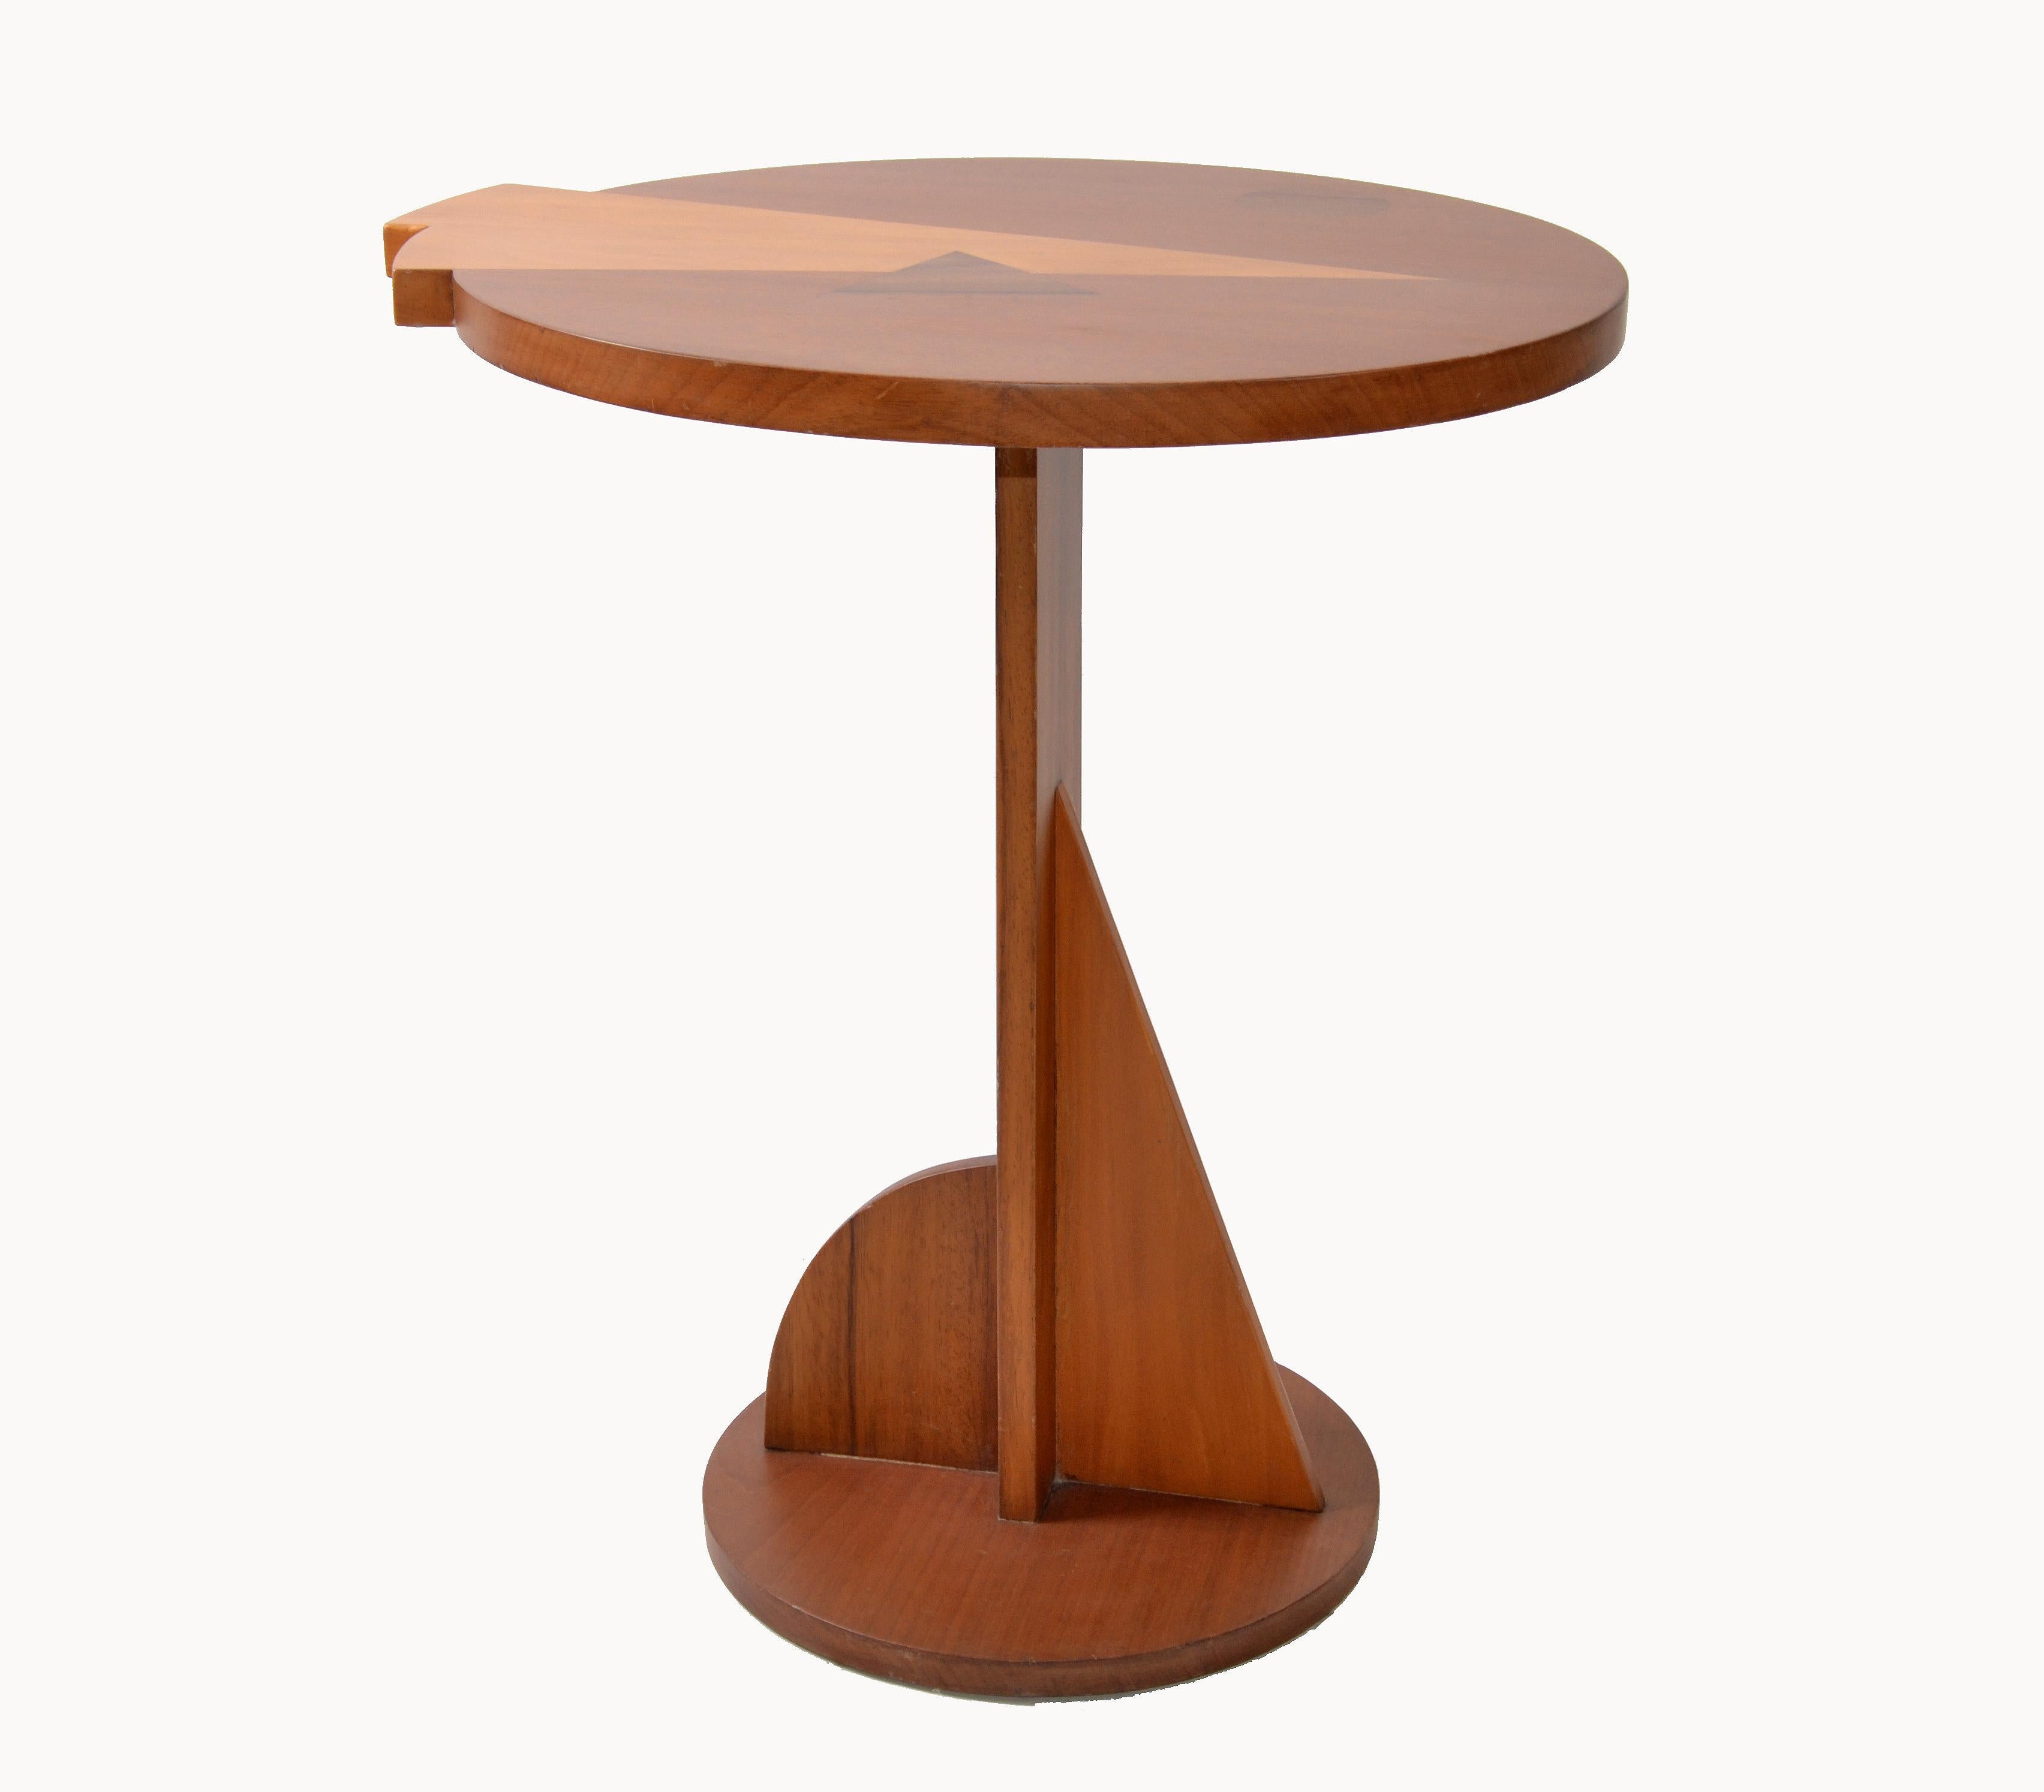 Italian Mid-Century Modern Round Mahogany Wood Marquetry Side or Cocktail Table, Italy